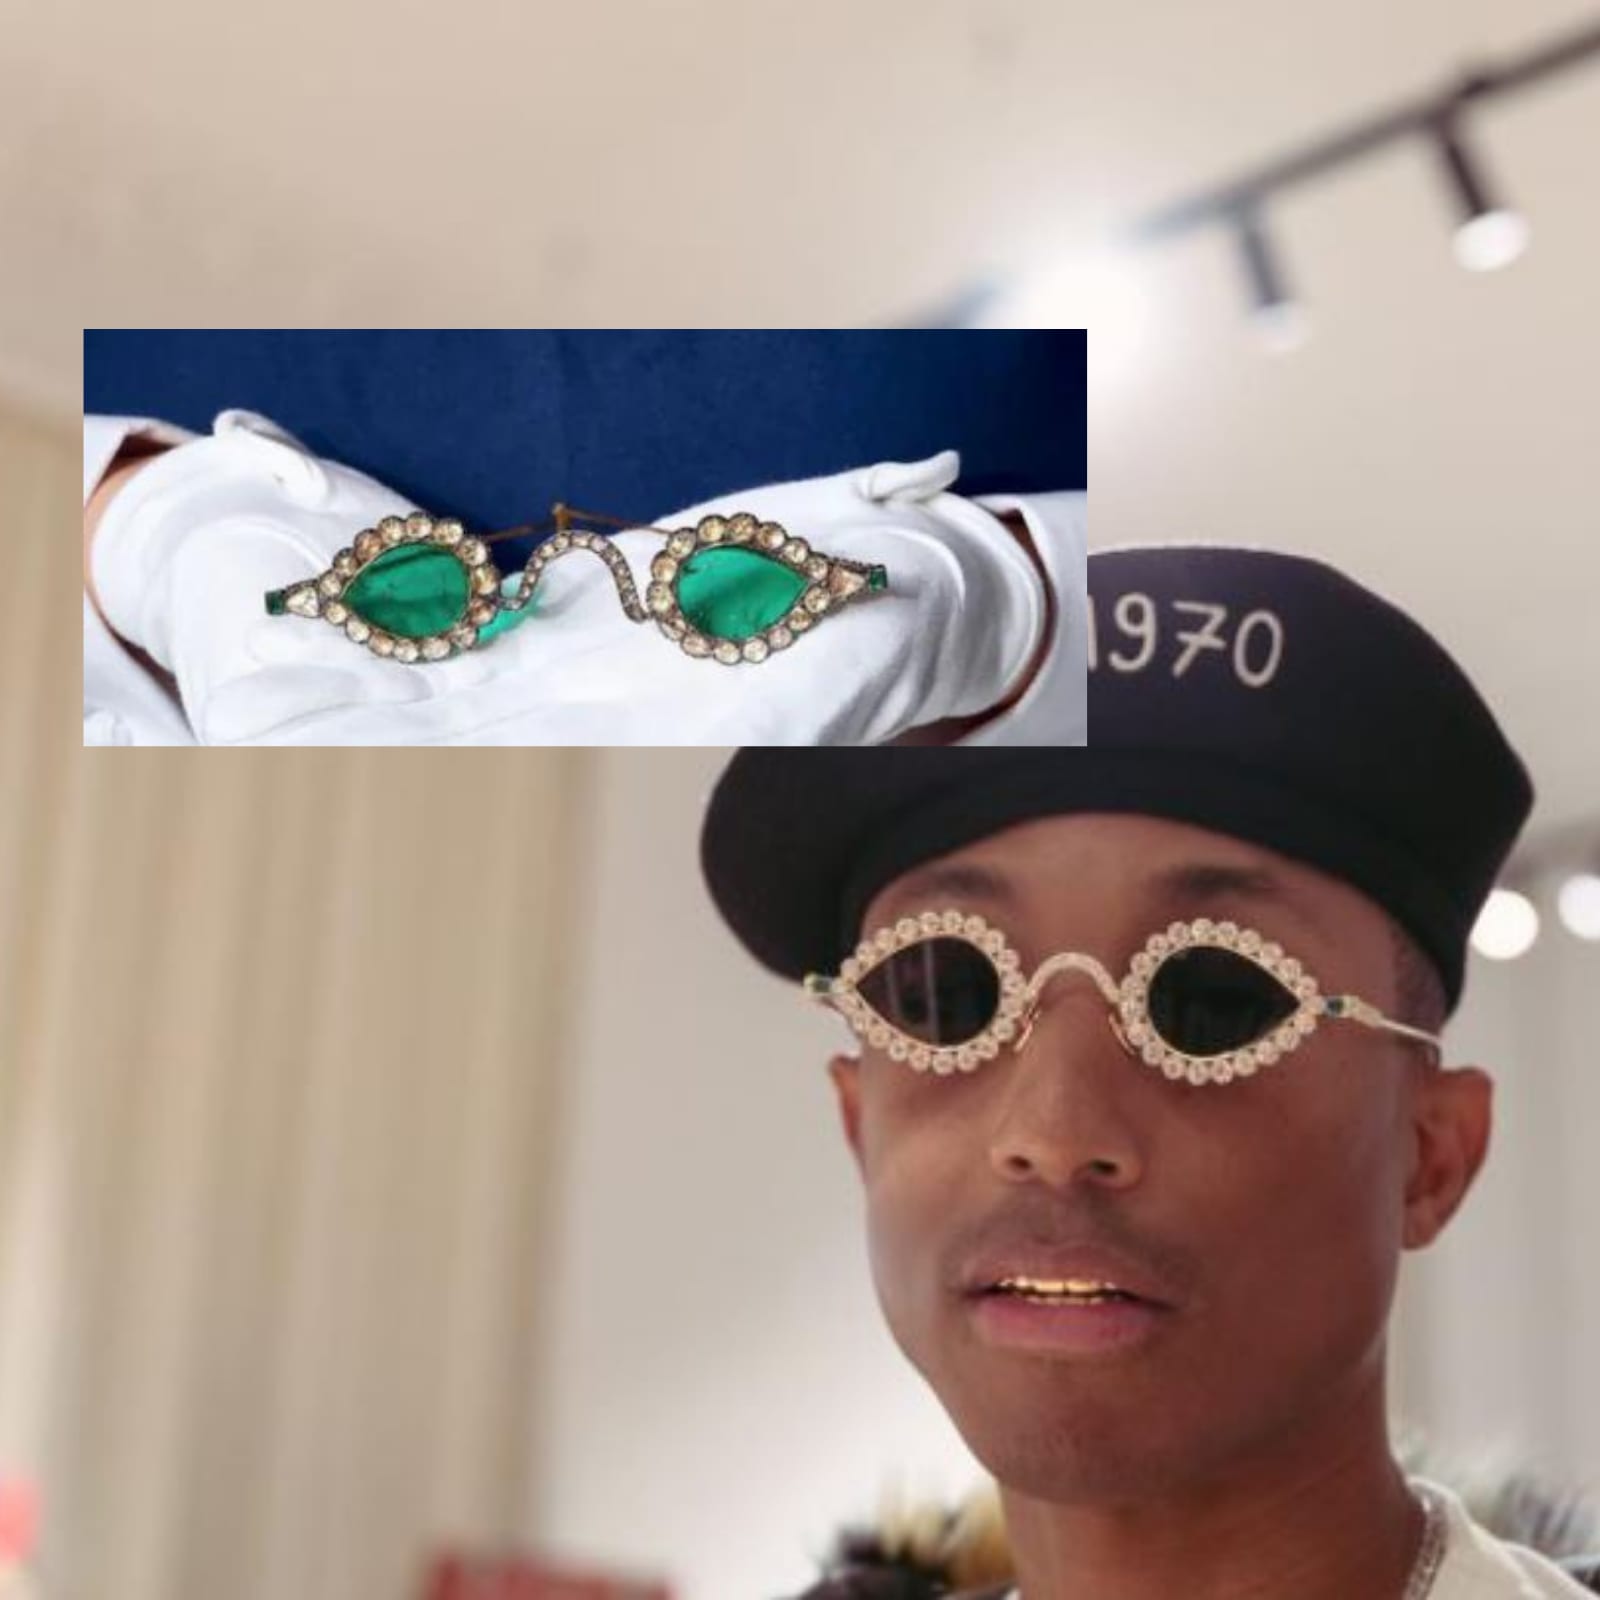 History of Pharrell Williams' Collaborations with Chanel